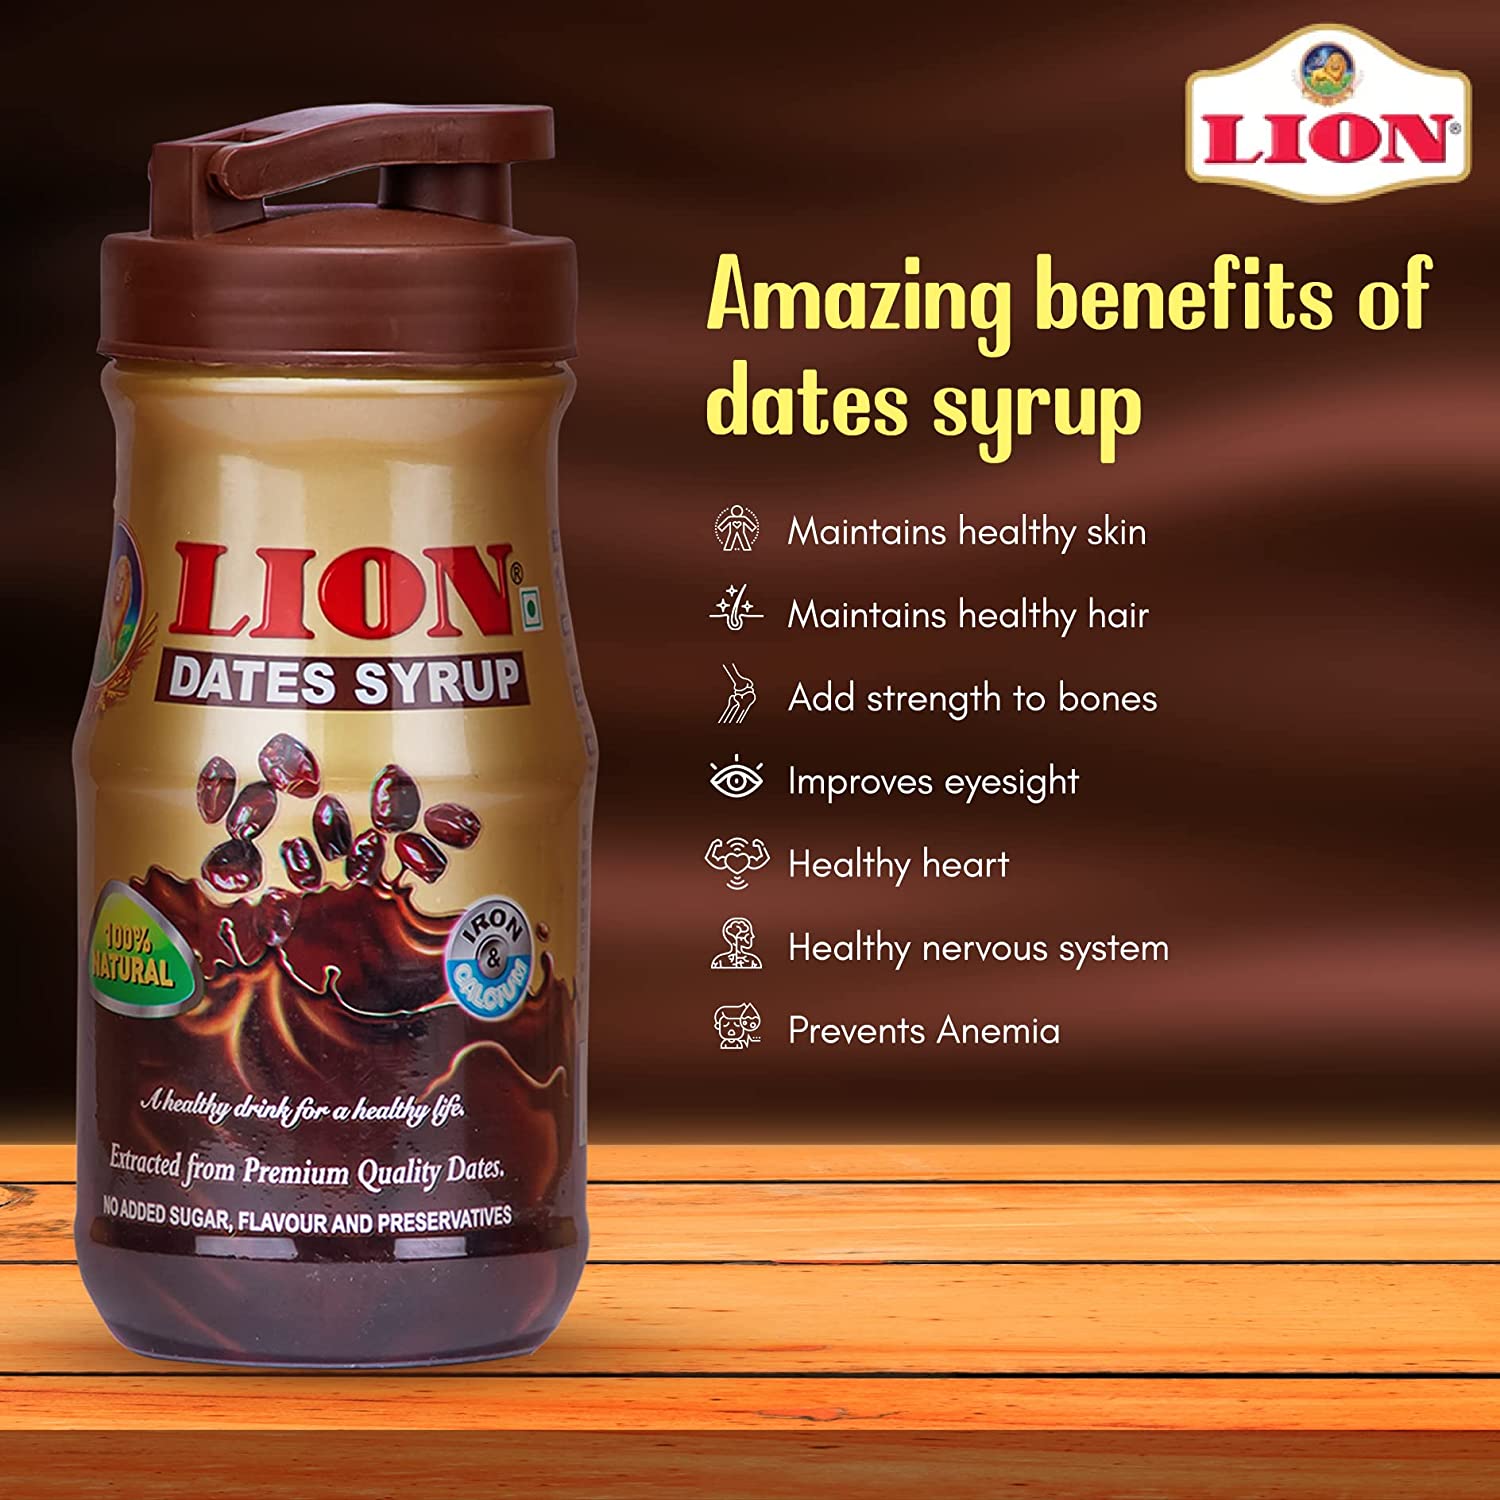 Lion Dates Syrup 1 Kg | 100% Pure Dates Syrup | No Added Sugar and Preservatives | Lion Dates Syrup for Milk | lion syrup